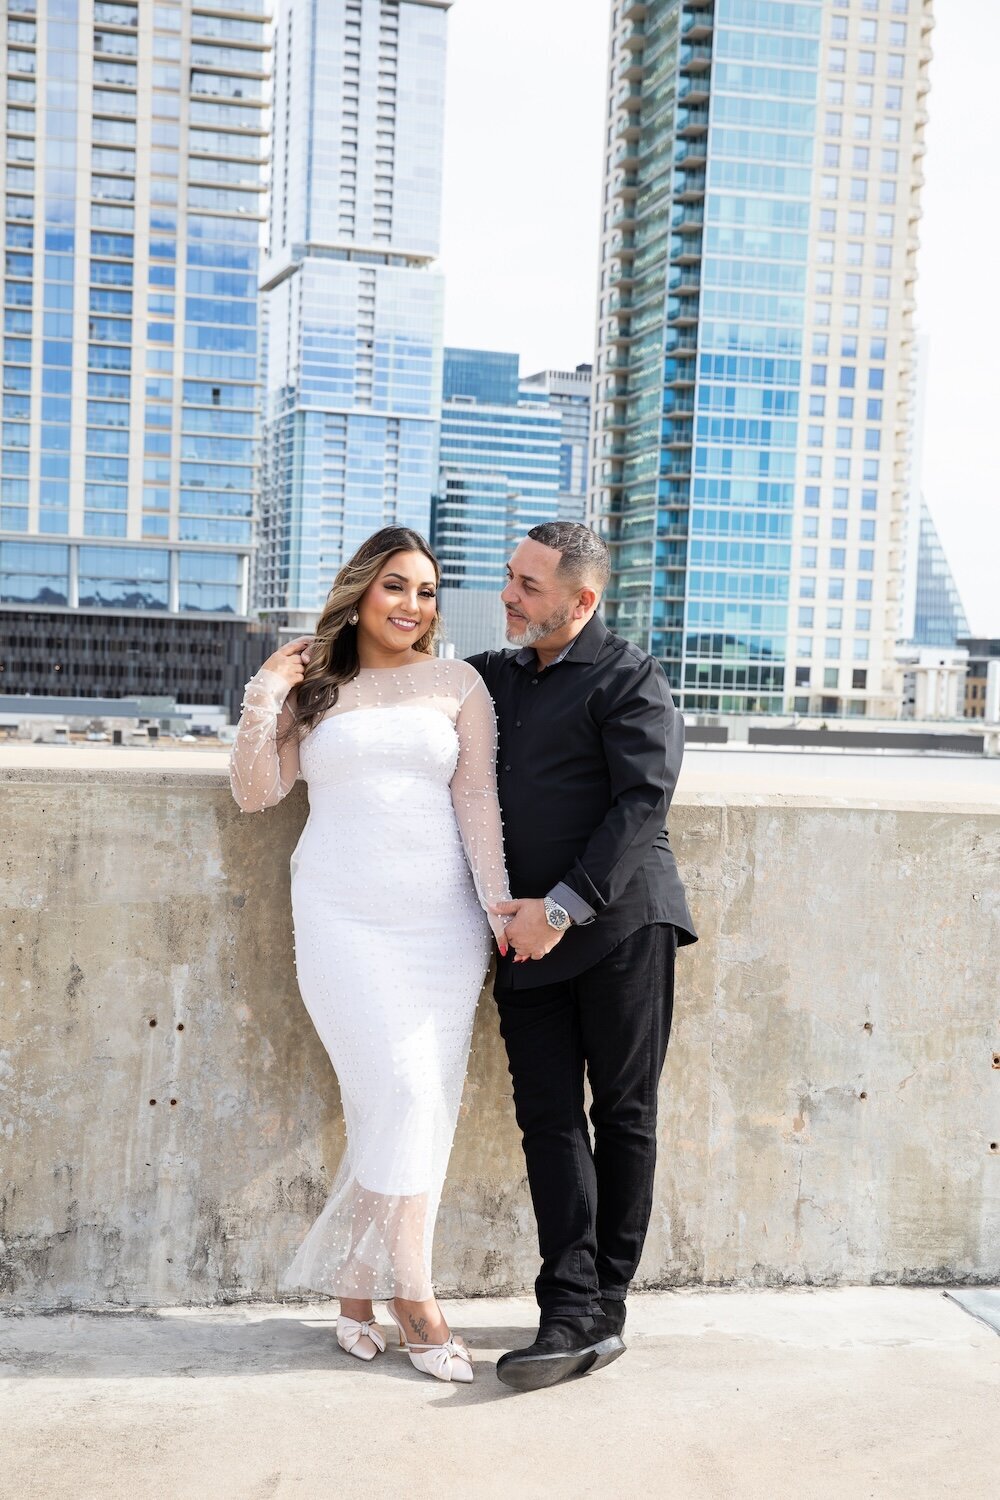 An Austin wedding photographer captures a beautiful photo of a bride and groom posing in front of a city skyline.